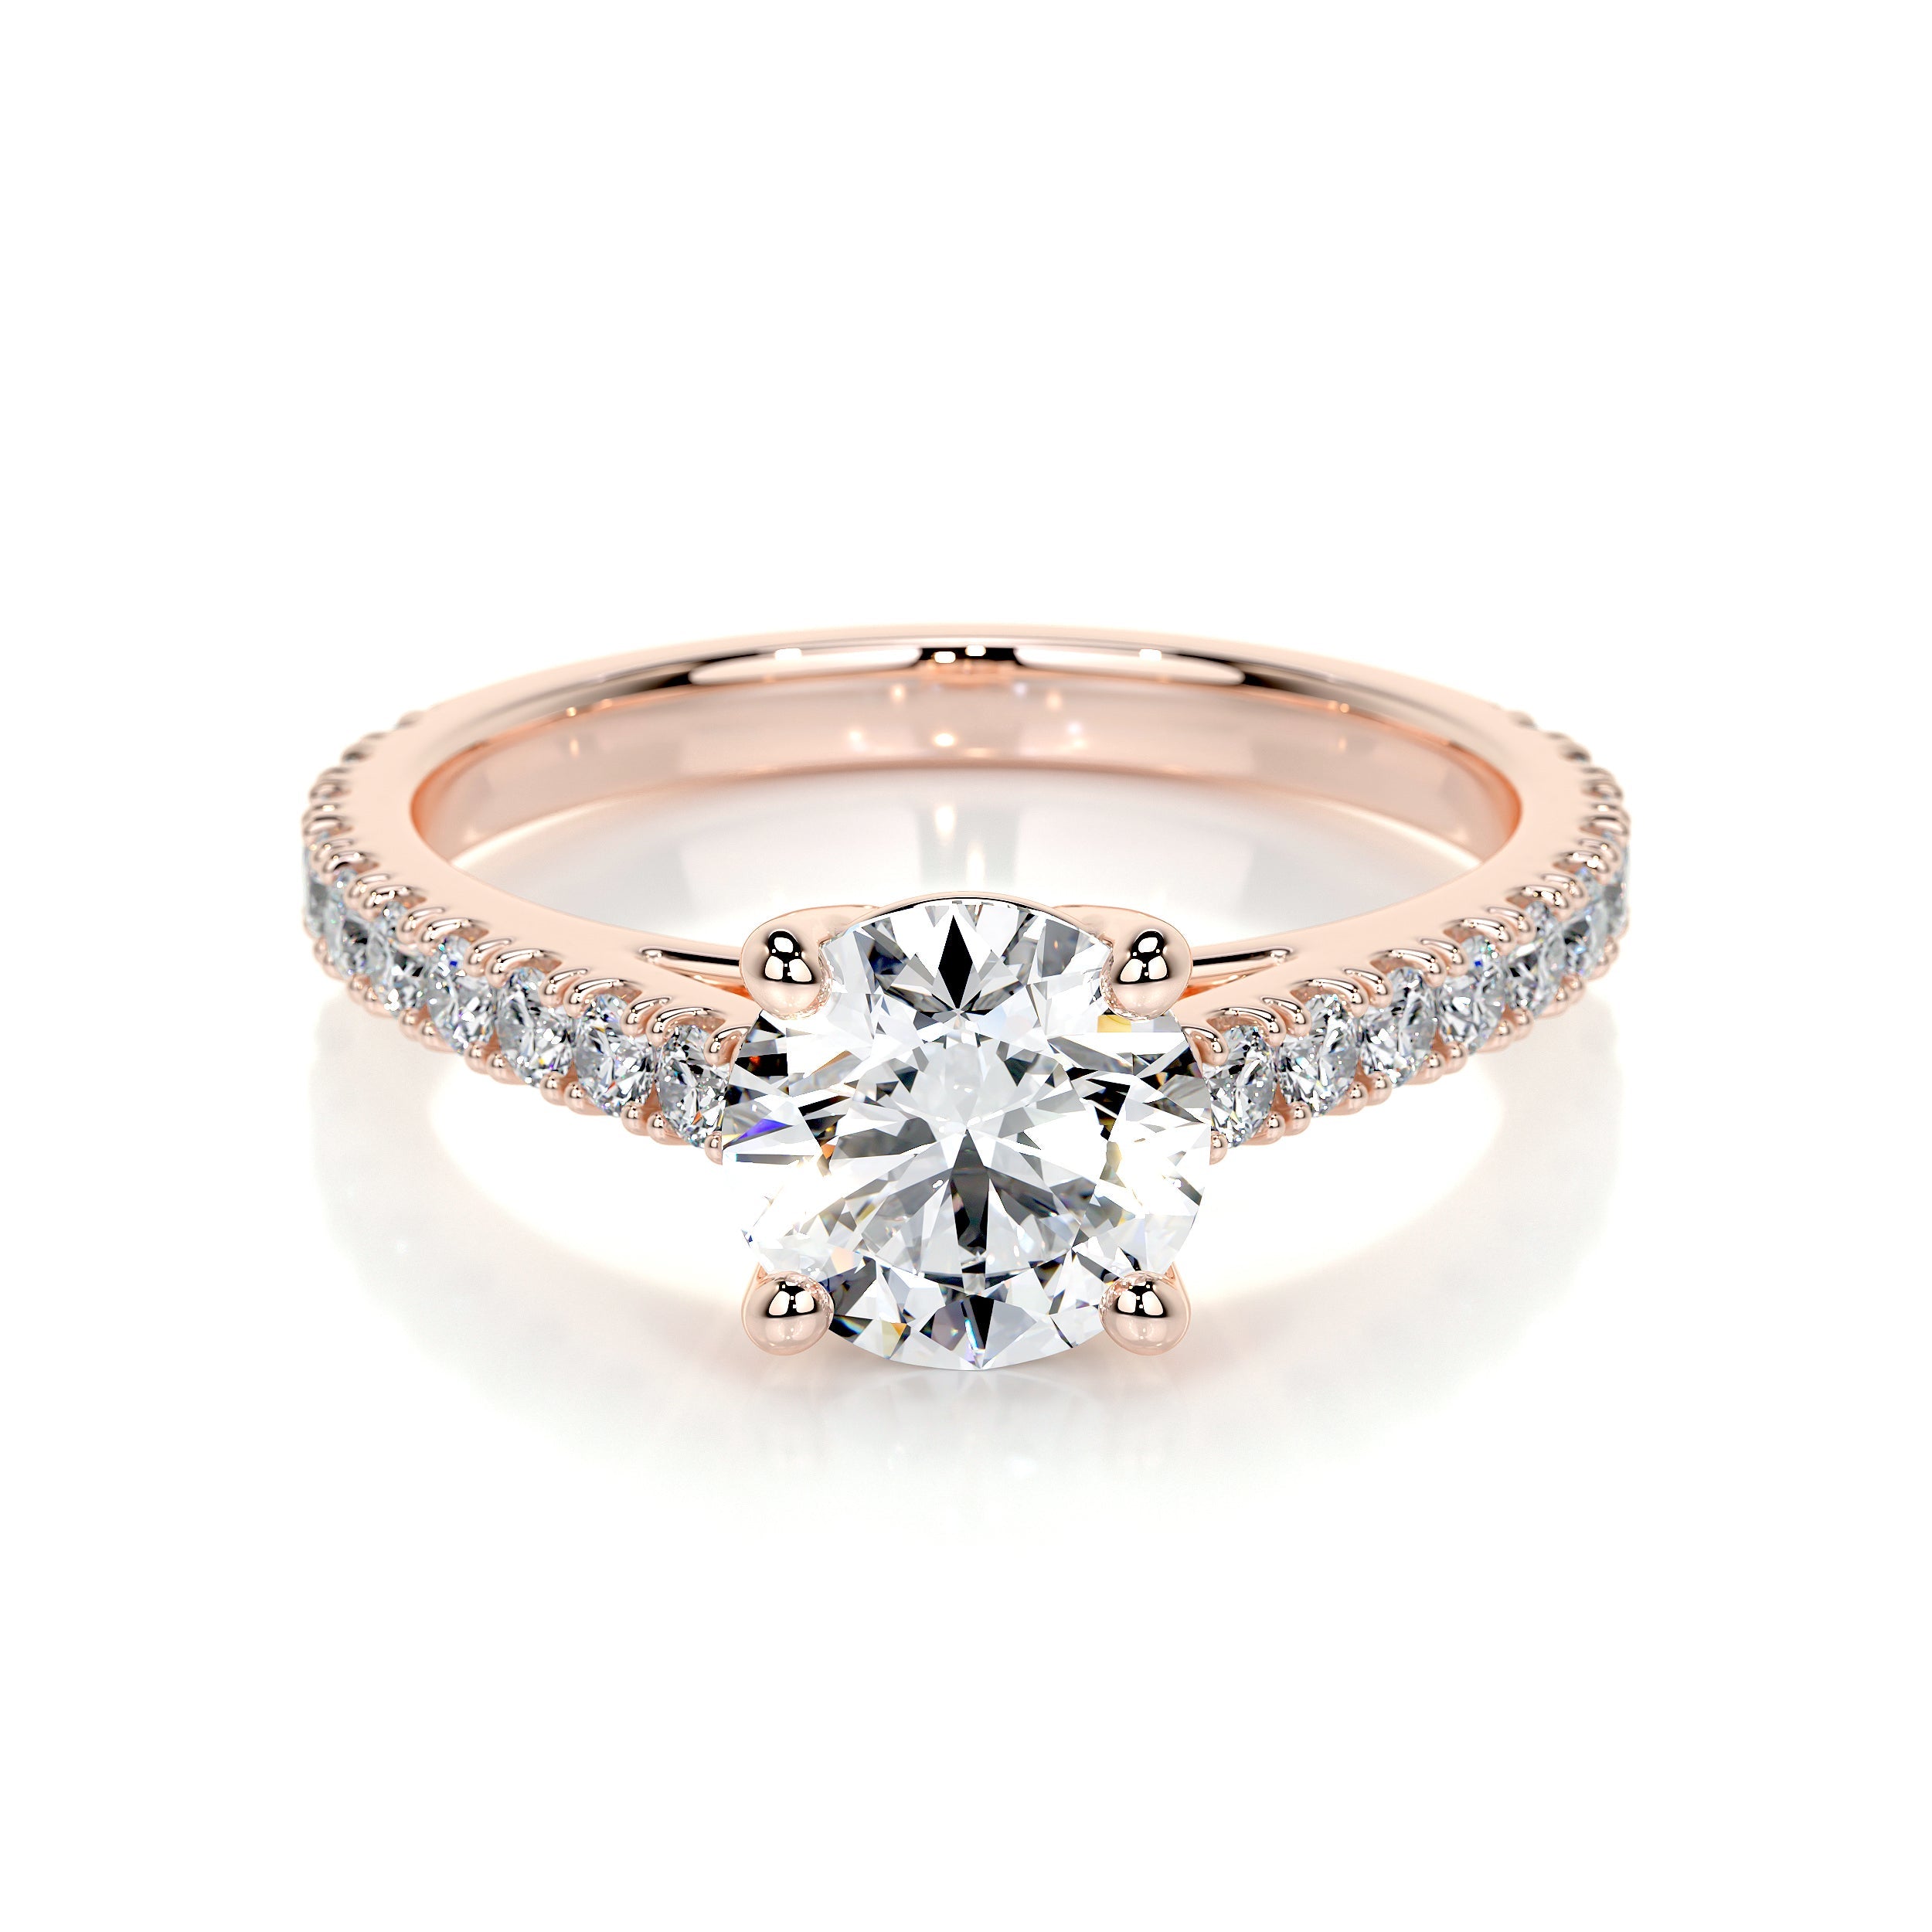 Buy 10k Rose Gold 3 Carat CZ Solitaire Halo Proposal Engagement Ring  Set(Size 4) at Amazon.in